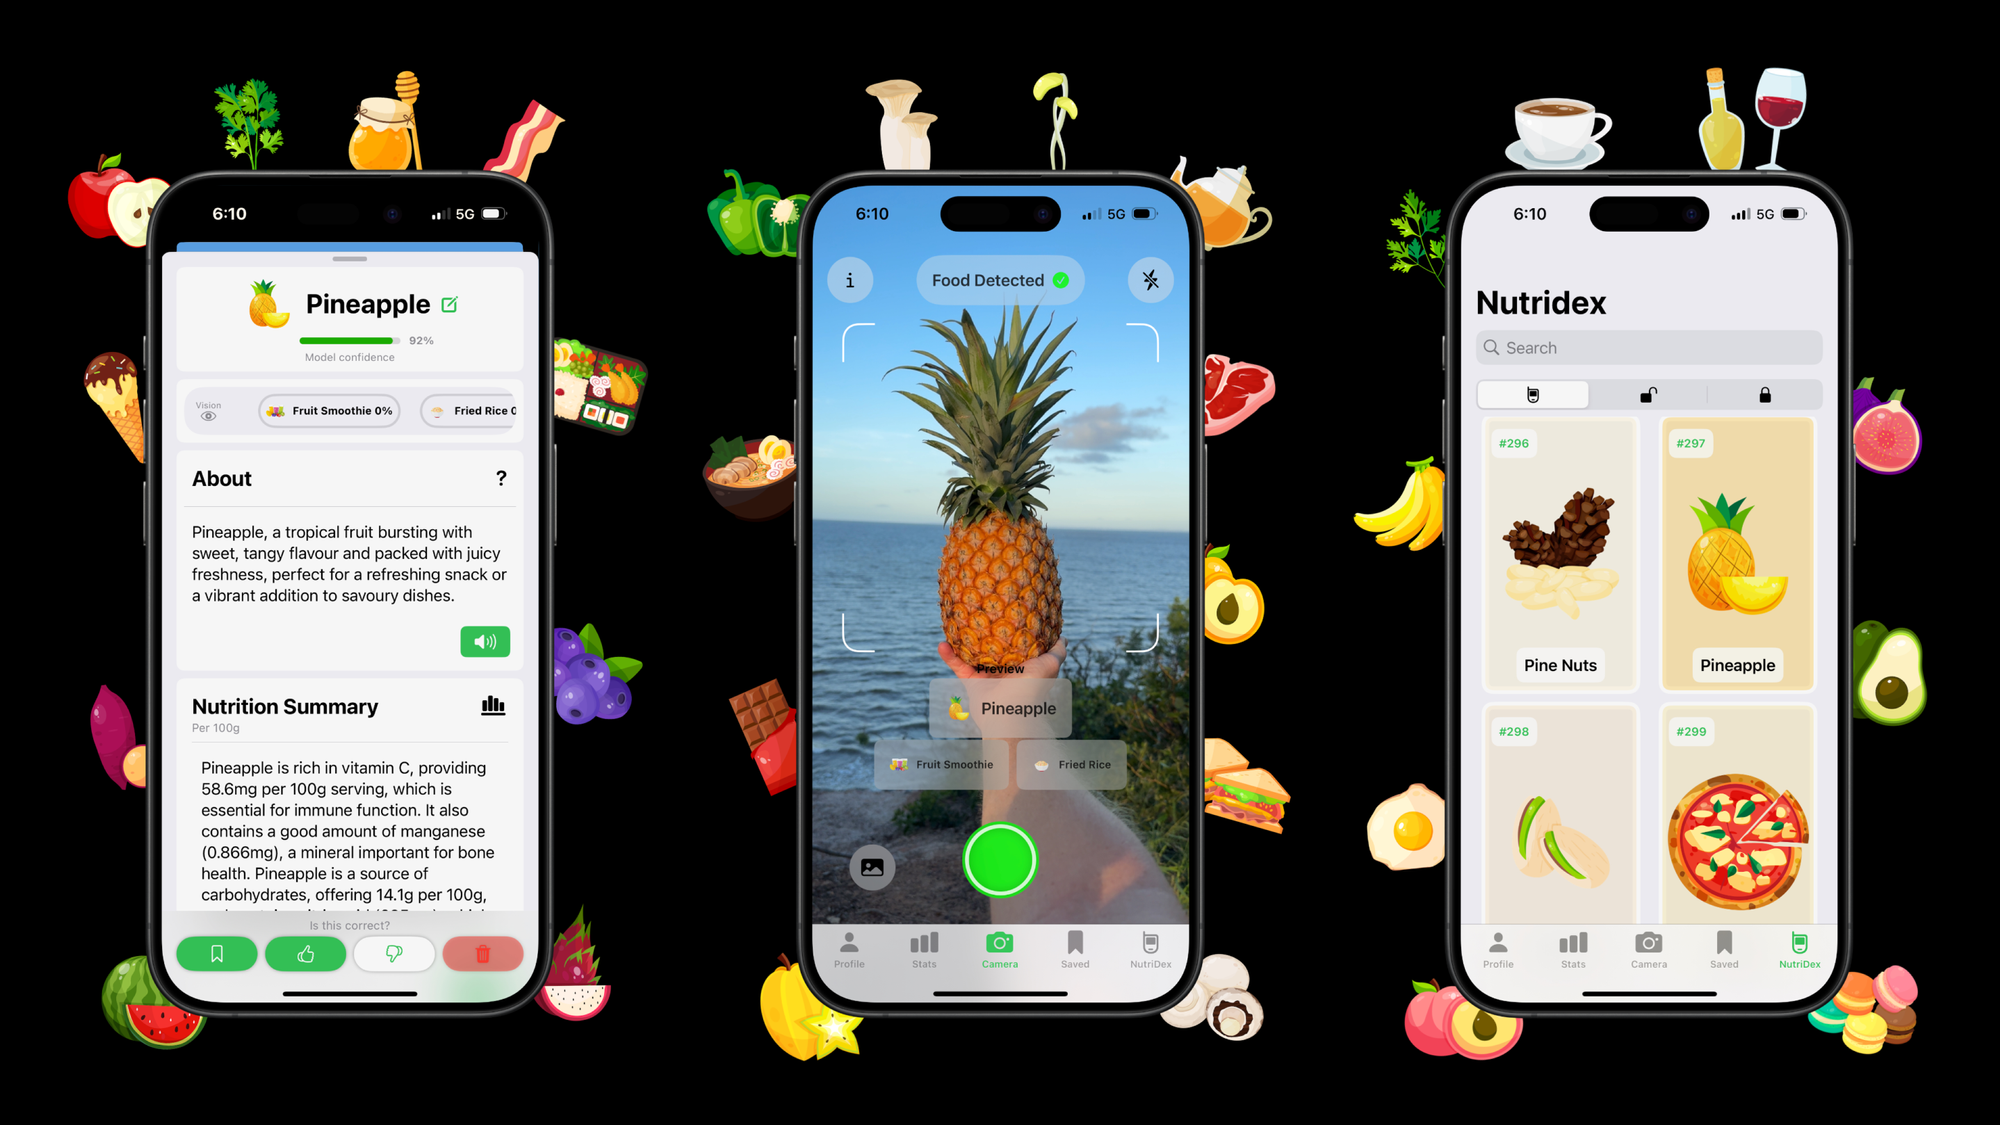 Graphic showing the different screens of Nutrify from taking a photo of food to learning about it to having foods in the Nutridex